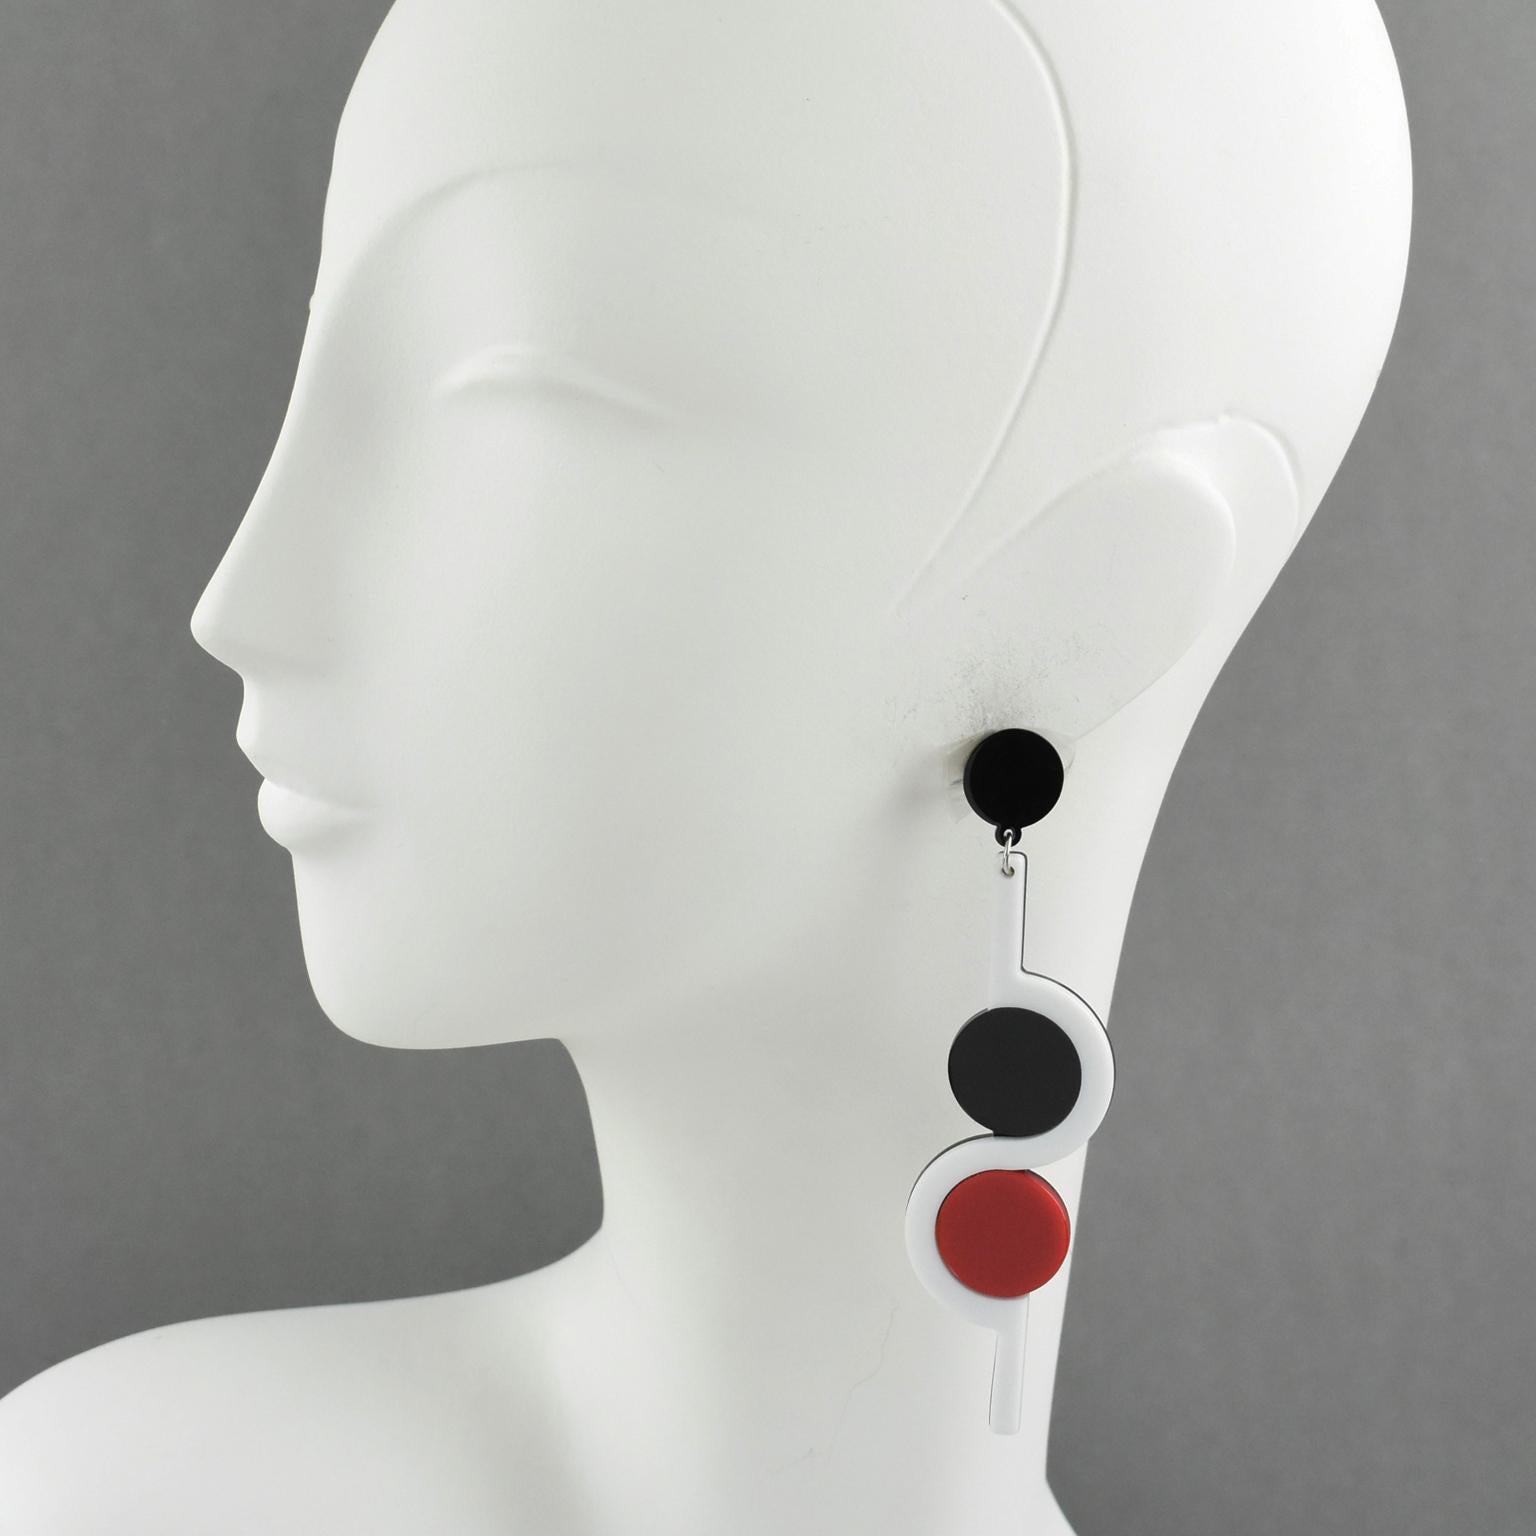 Stunning designer studio extra long Lucite earrings for pierced ears. Featuring minimalist dangling drop design with geometric shape. Classy assorted colors of black, red and white. No visible signature. 
Measurements: 4.13 in. long (10.5 cm) x 1.07